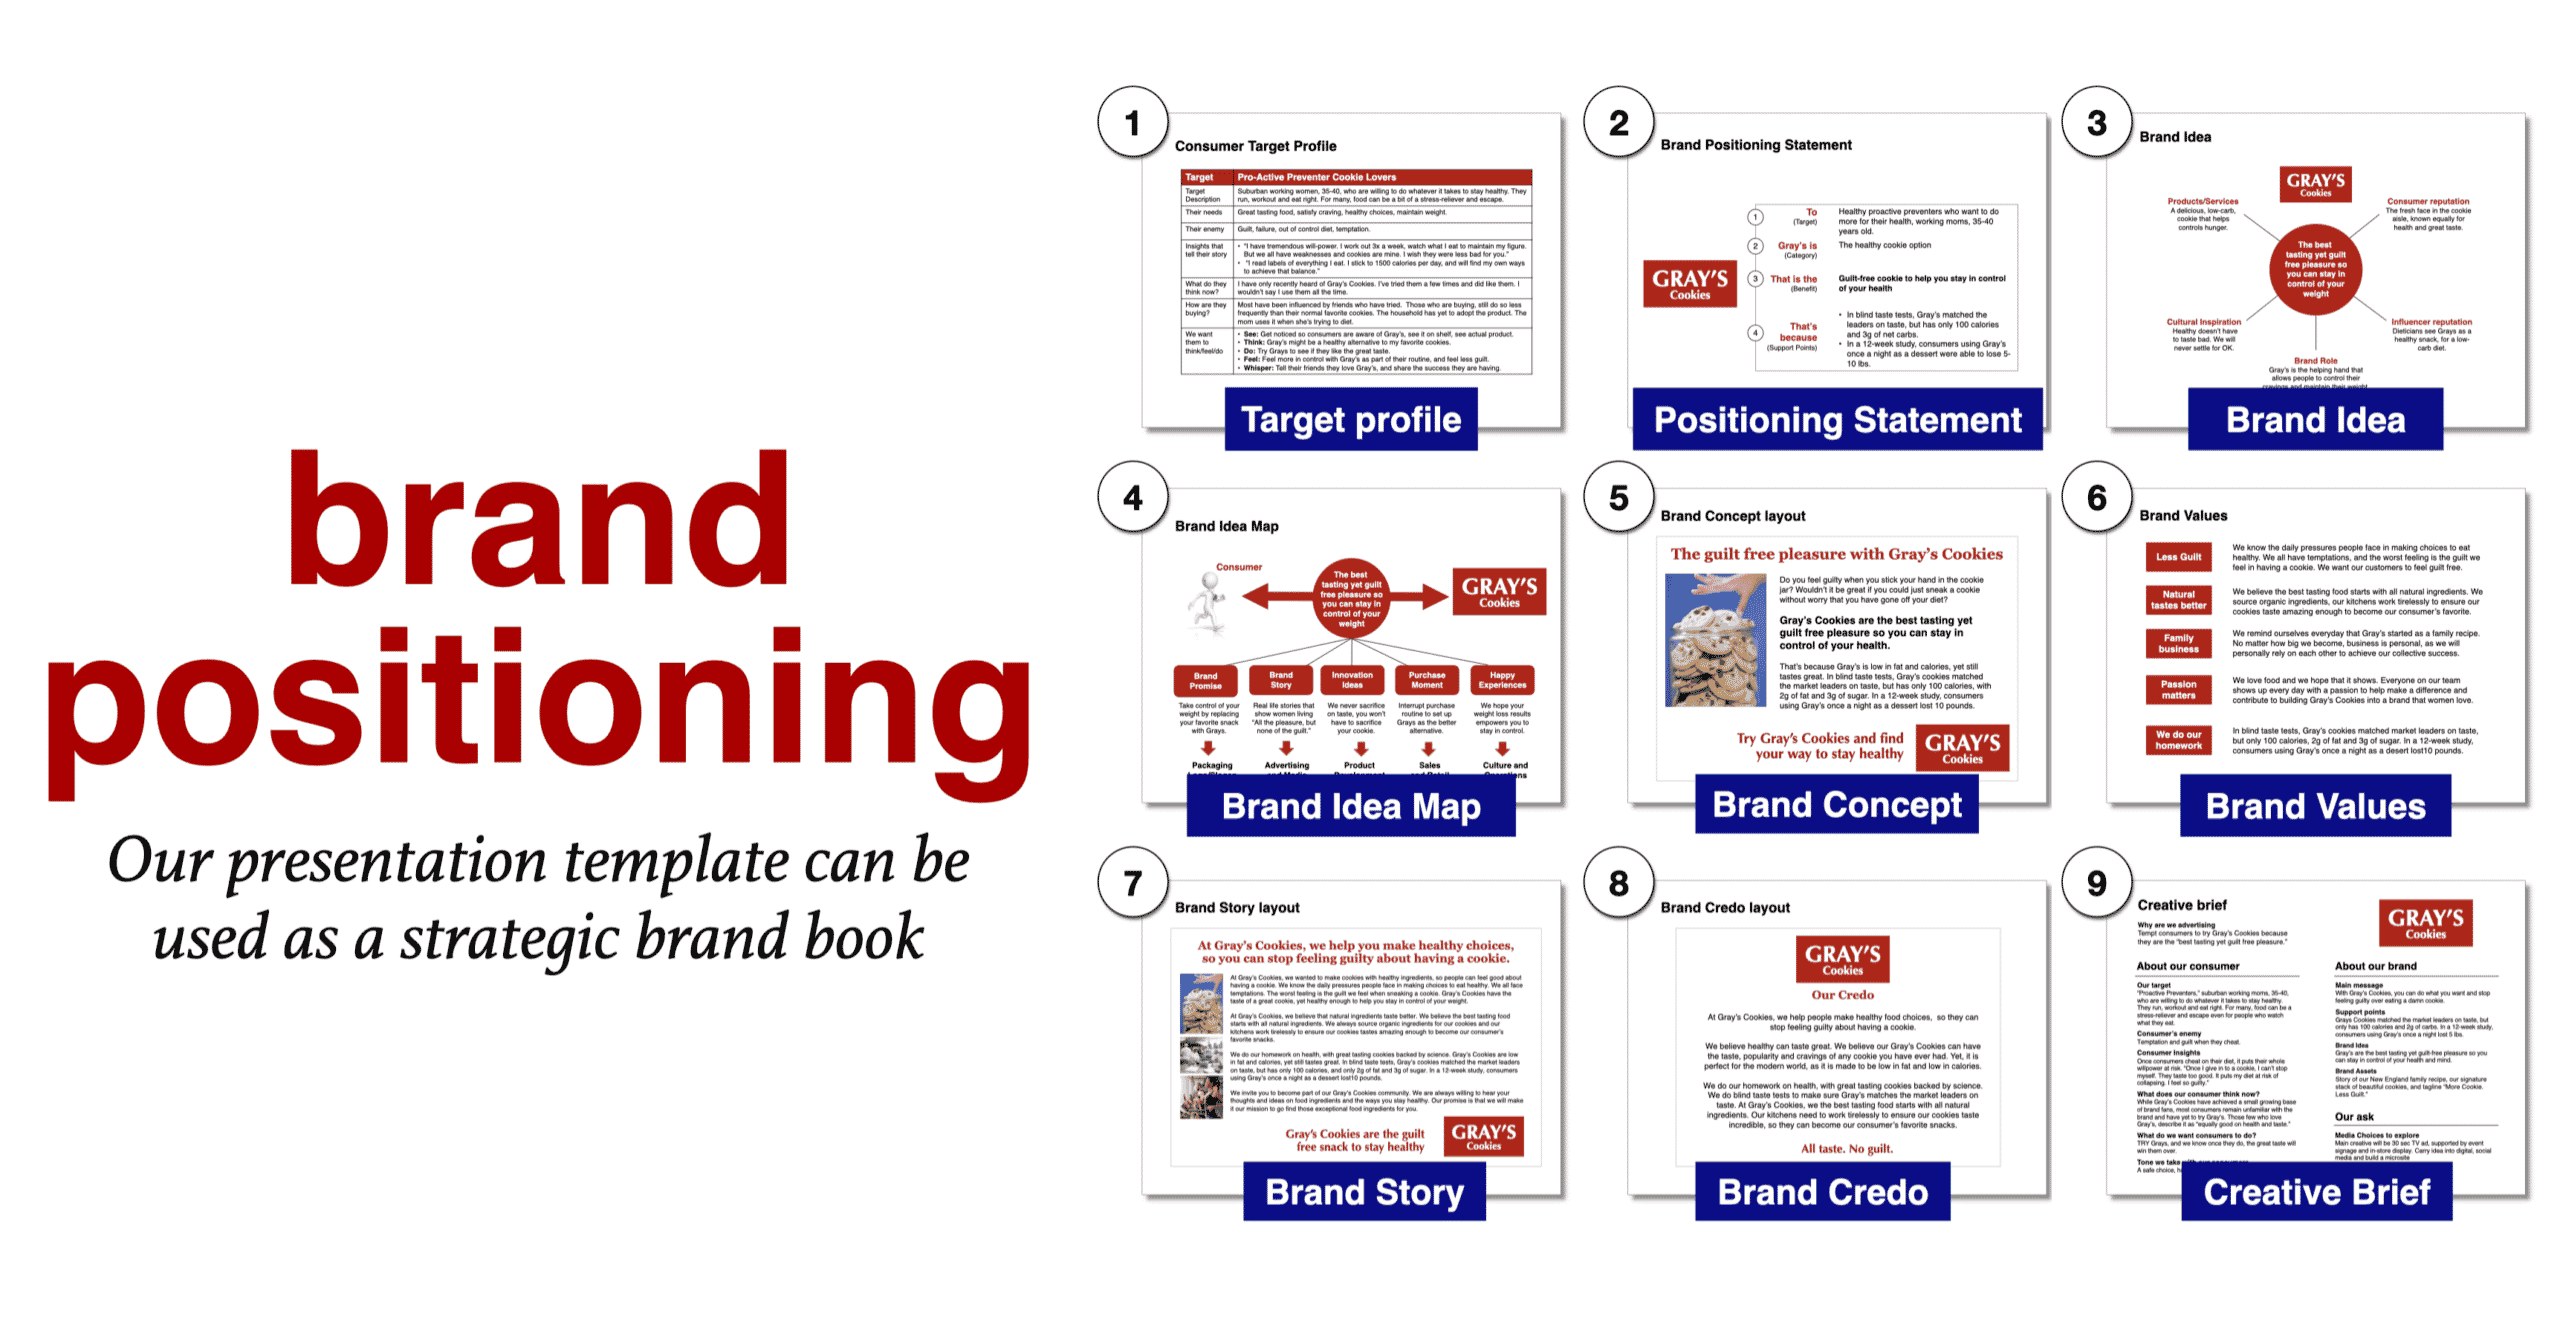 Brand Positioning Template